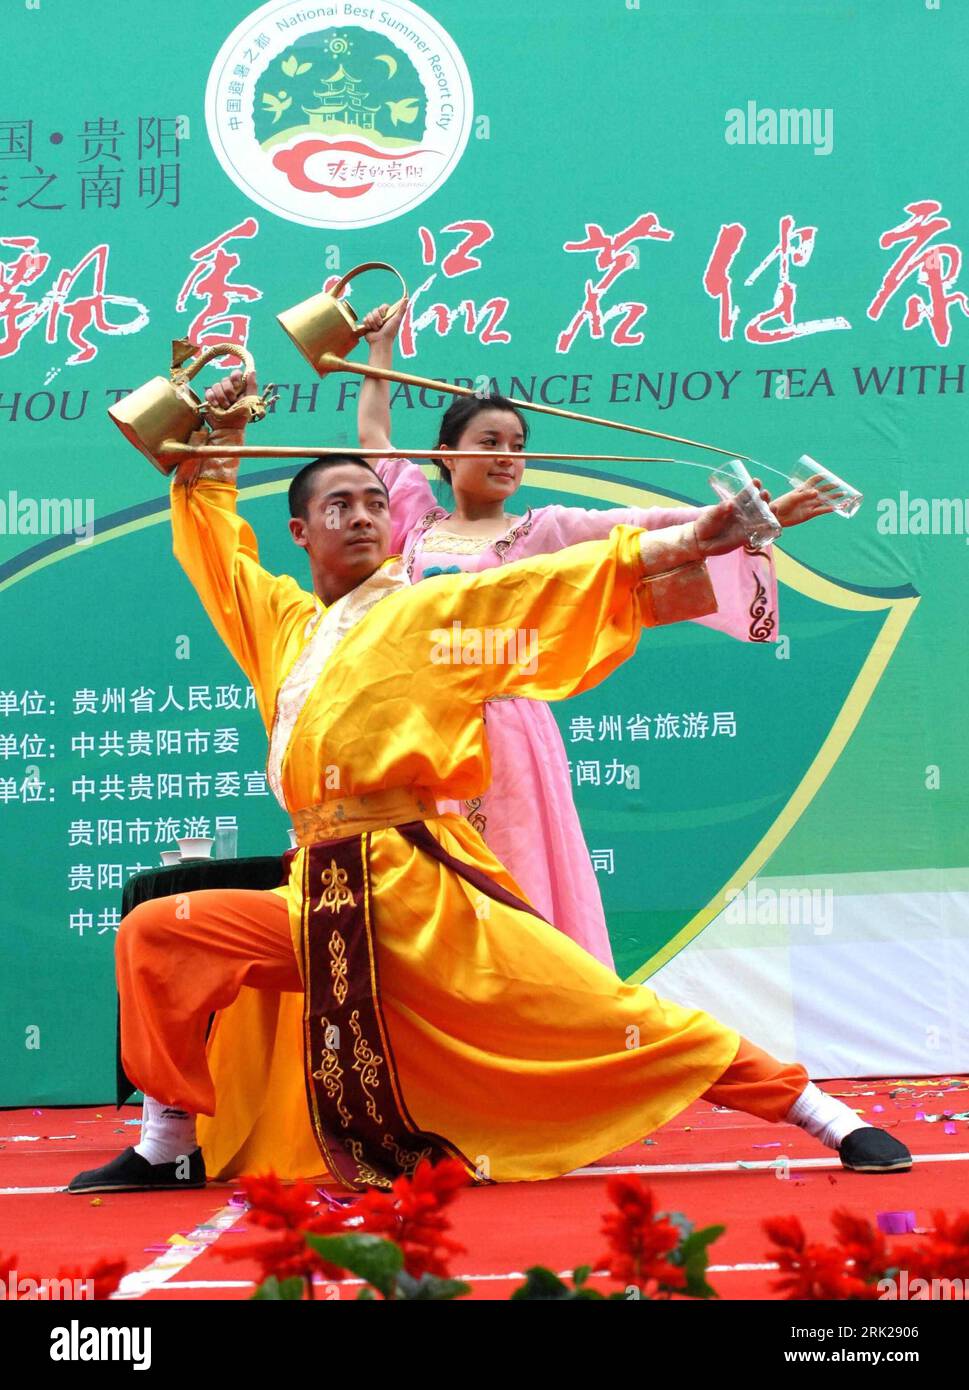 Bildnummer: 53154003  Datum: 27.05.2009  Copyright: imago/Xinhua  Two performers show their acrobatic skill of pouring water with a long spout into a glass at the opening ceremony of the Enjoying Fragrant Tea with Health in Guiyang, southwest China s Guizhou Province, May 26, 2009. kbdig   Zwei Interpreten Show Tee in Guiyang, Zeremonie, Zubereitung hoch    Bildnummer 53154003 Date 27 05 2009 Copyright Imago XINHUA Two Performers Show their Acrobatic Skill of pouring Water With a Long Spout into a Glass AT The Opening Ceremony of The enjoying Fragrant Tea With Health in Guiyang Southwest China Stock Photo